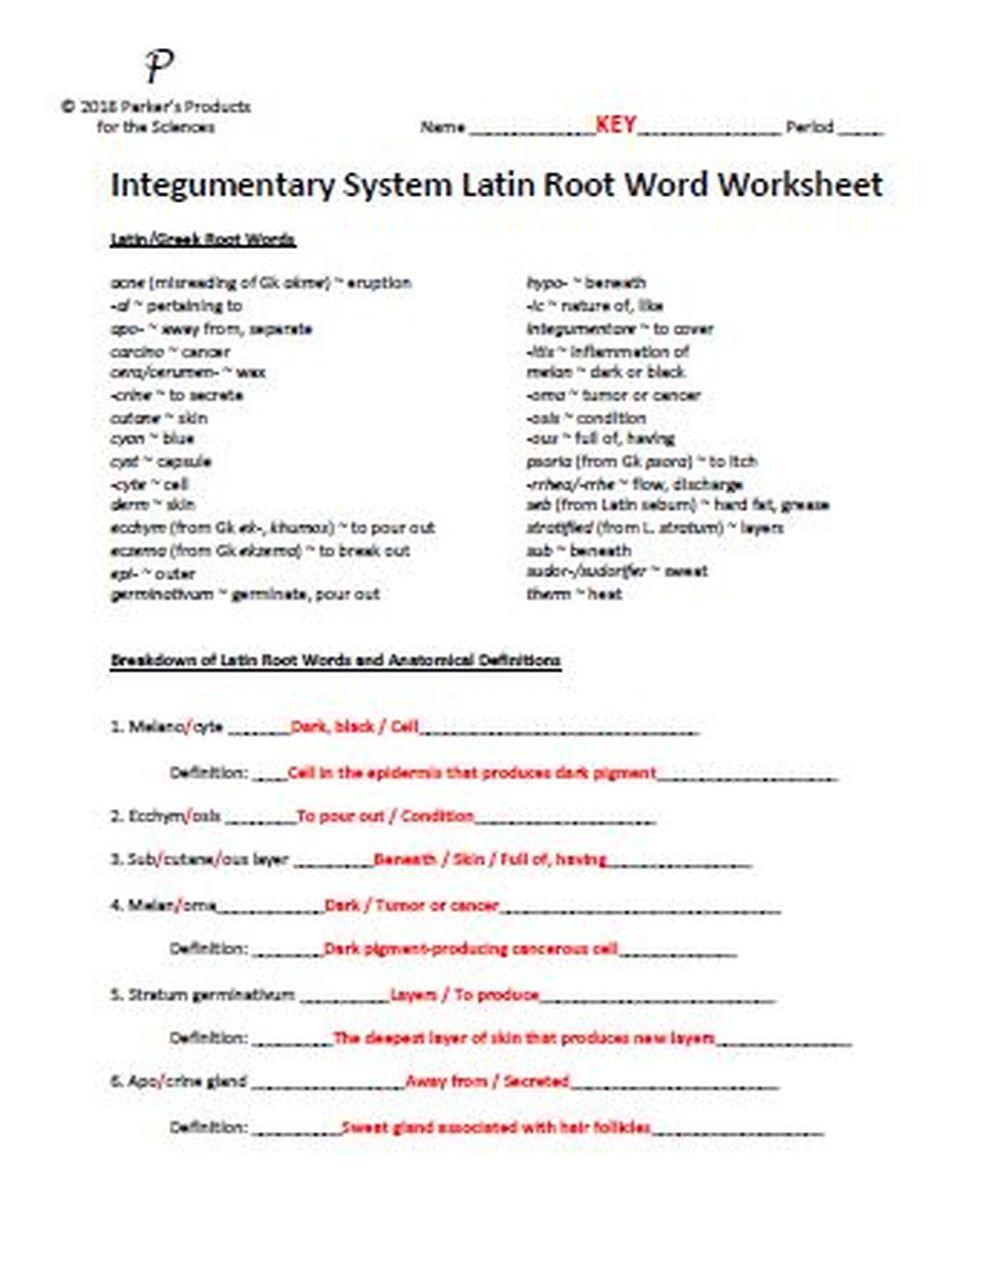 Integumentary System Worksheet Answers Integumentary System Latin Root Word Worksheet